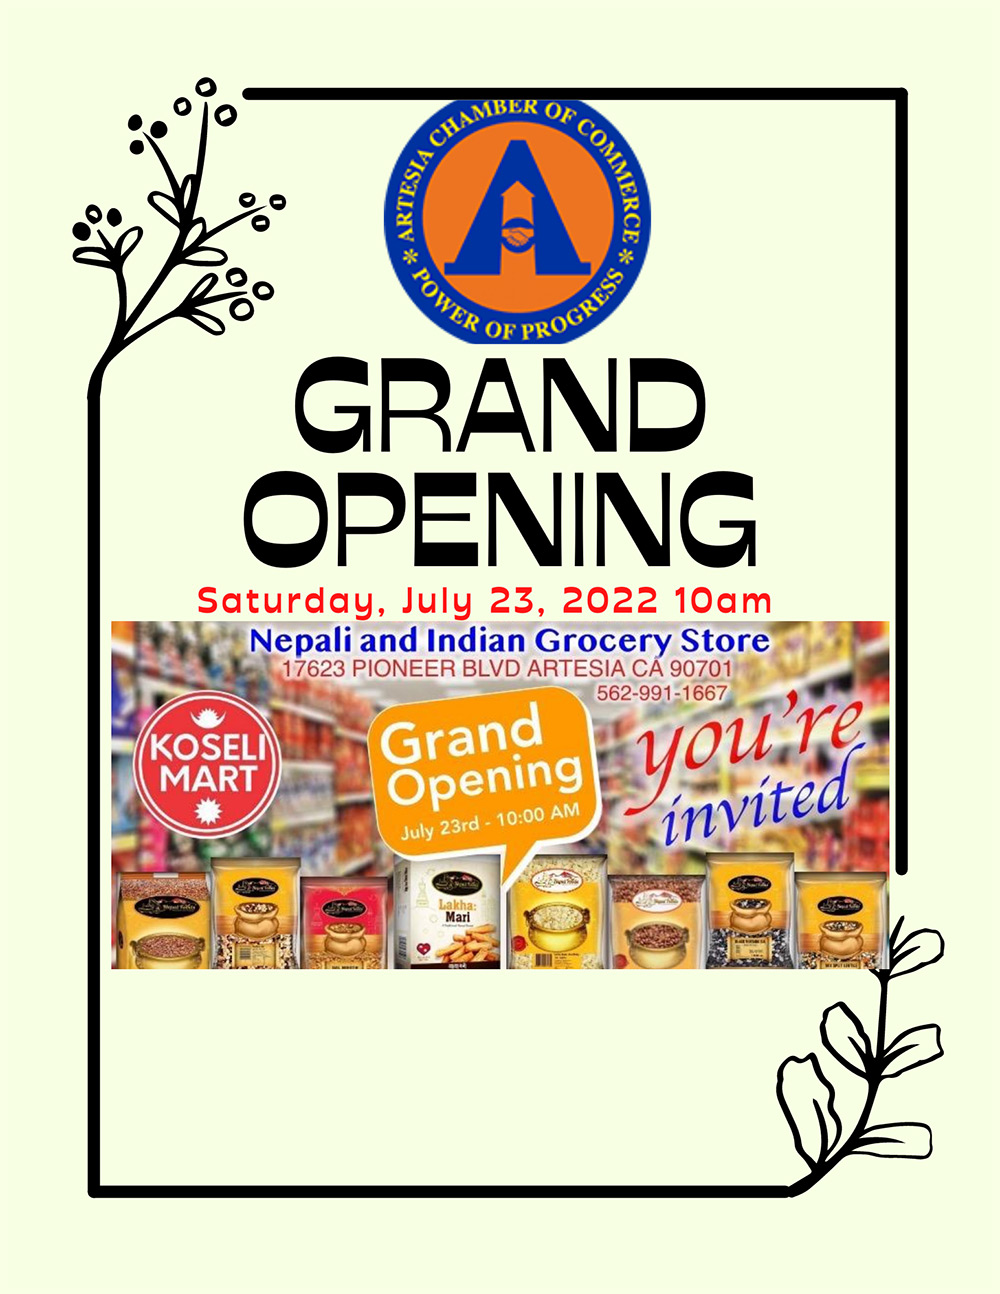 Grand Opening - Nepali and Indian Grocery Store